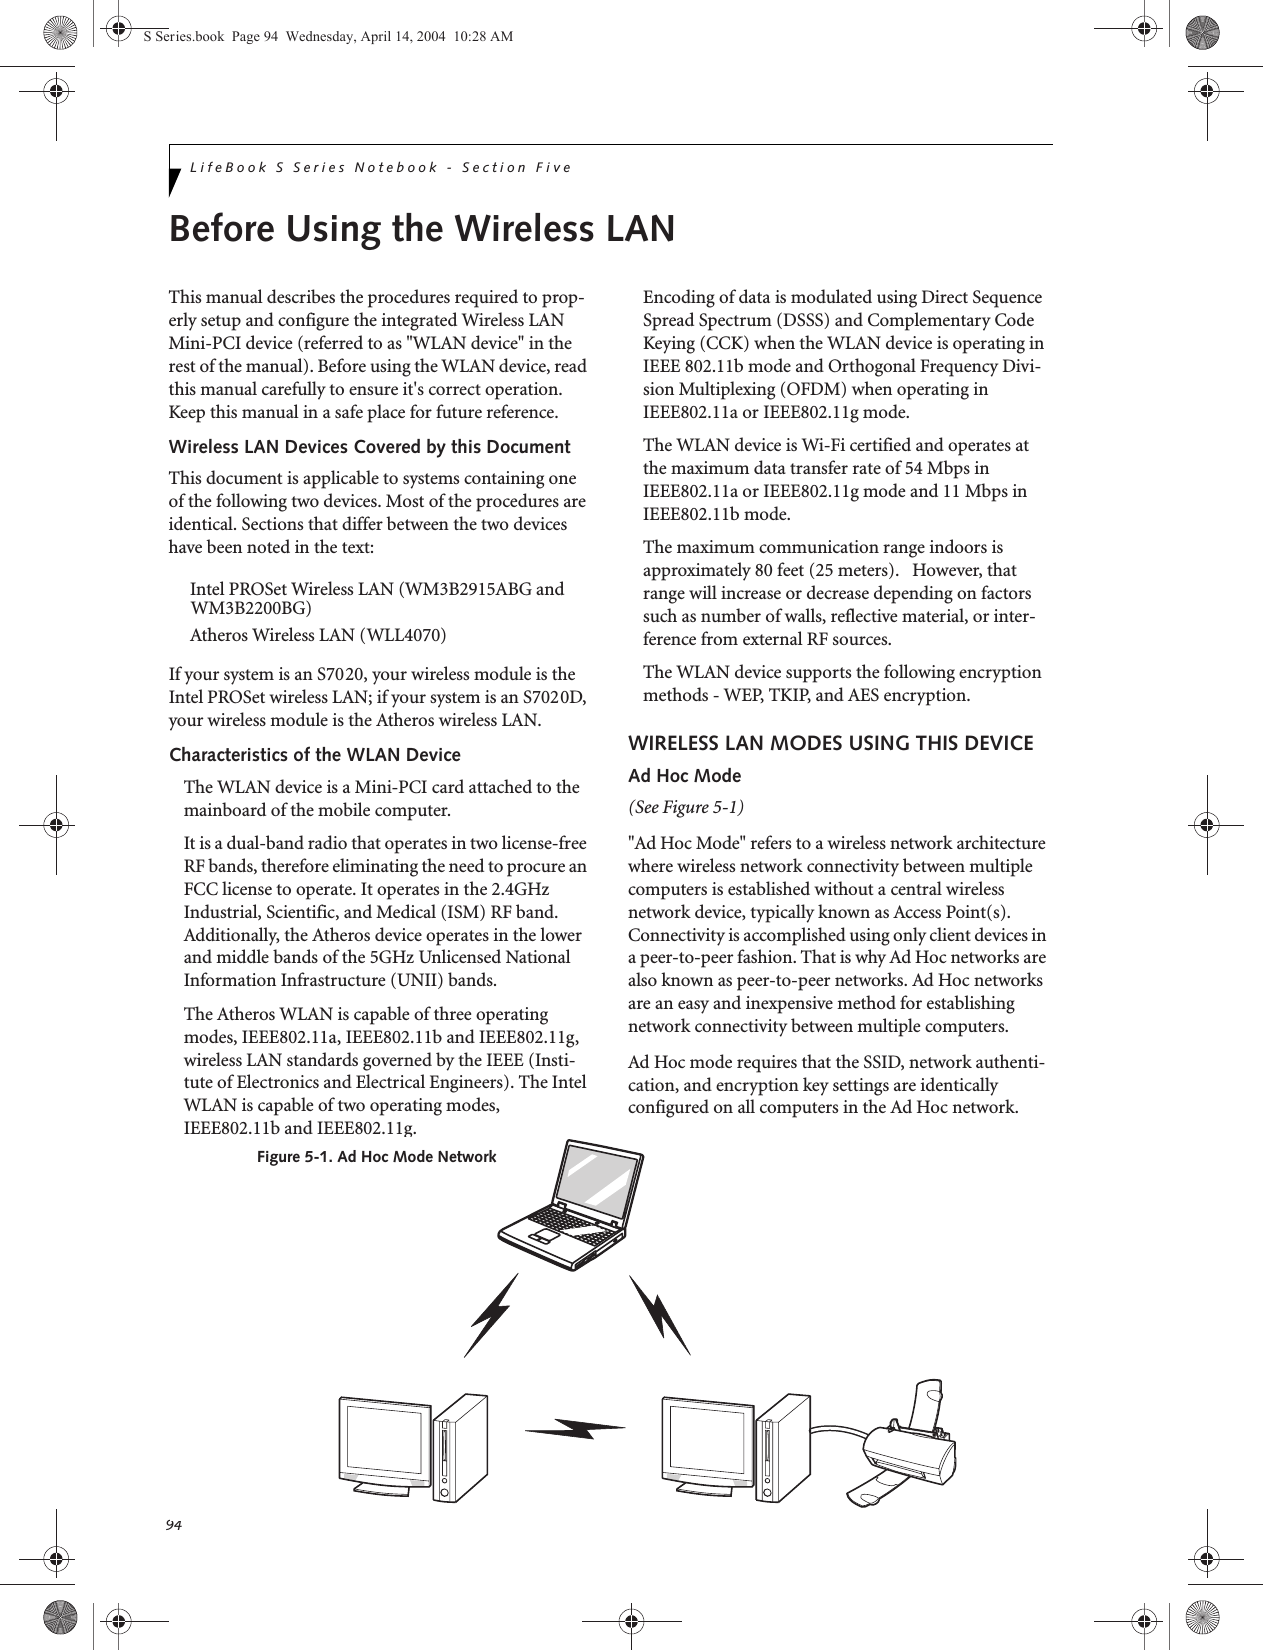 94LifeBook S Series Notebook - Section FiveBefore Using the Wireless LANThis manual describes the procedures required to prop-erly setup and configure the integrated Wireless LAN Mini-PCI device (referred to as &quot;WLAN device&quot; in the rest of the manual). Before using the WLAN device, read this manual carefully to ensure it&apos;s correct operation. Keep this manual in a safe place for future reference.Wireless LAN Devices Covered by this DocumentThis document is applicable to systems containing one of the following two devices. Most of the procedures are identical. Sections that differ between the two devices have been noted in the text:Intel PROSet Wireless LAN (WM3B2915ABG andAtheros Wireless LAN (WLL4070)If your system is an S7020, your wireless module is the Intel PROSet wireless LAN; if your system is an S7020D, your wireless module is the Atheros wireless LAN.Characteristics of the WLAN DeviceThe WLAN device is a Mini-PCI card attached to the mainboard of the mobile computer. It is a dual-band radio that operates in two license-free RF bands, therefore eliminating the need to procure an FCC license to operate. It operates in the 2.4GHz Industrial, Scientific, and Medical (ISM) RF band. Additionally, the Atheros device operates in the lower and middle bands of the 5GHz Unlicensed National Information Infrastructure (UNII) bands. The Atheros WLAN is capable of three operating modes, IEEE802.11a, IEEE802.11b and IEEE802.11g, wireless LAN standards governed by the IEEE (Insti-tute of Electronics and Electrical Engineers). The Intel WLAN is capable of two operating modes, IEEE802.11b and IEEE802.11g.Encoding of data is modulated using Direct Sequence Spread Spectrum (DSSS) and Complementary Code Keying (CCK) when the WLAN device is operating in IEEE 802.11b mode and Orthogonal Frequency Divi-sion Multiplexing (OFDM) when operating in IEEE802.11a or IEEE802.11g mode. The WLAN device is Wi-Fi certified and operates at the maximum data transfer rate of 54 Mbps in IEEE802.11a or IEEE802.11g mode and 11 Mbps in IEEE802.11b mode.The maximum communication range indoors is approximately 80 feet (25 meters).   However, that range will increase or decrease depending on factors such as number of walls, reflective material, or inter-ference from external RF sources.The WLAN device supports the following encryption methods - WEP, TKIP, and AES encryption.WIRELESS LAN MODES USING THIS DEVICEAd Hoc Mode (See Figure 5-1)&quot;Ad Hoc Mode&quot; refers to a wireless network architecture where wireless network connectivity between multiple computers is established without a central wireless network device, typically known as Access Point(s). Connectivity is accomplished using only client devices in a peer-to-peer fashion. That is why Ad Hoc networks are also known as peer-to-peer networks. Ad Hoc networks are an easy and inexpensive method for establishing network connectivity between multiple computers.Ad Hoc mode requires that the SSID, network authenti-cation, and encryption key settings are identically configured on all computers in the Ad Hoc network. Figure 5-1. Ad Hoc Mode NetworkS Series.book  Page 94  Wednesday, April 14, 2004  10:28 AMWM3B2200BG)